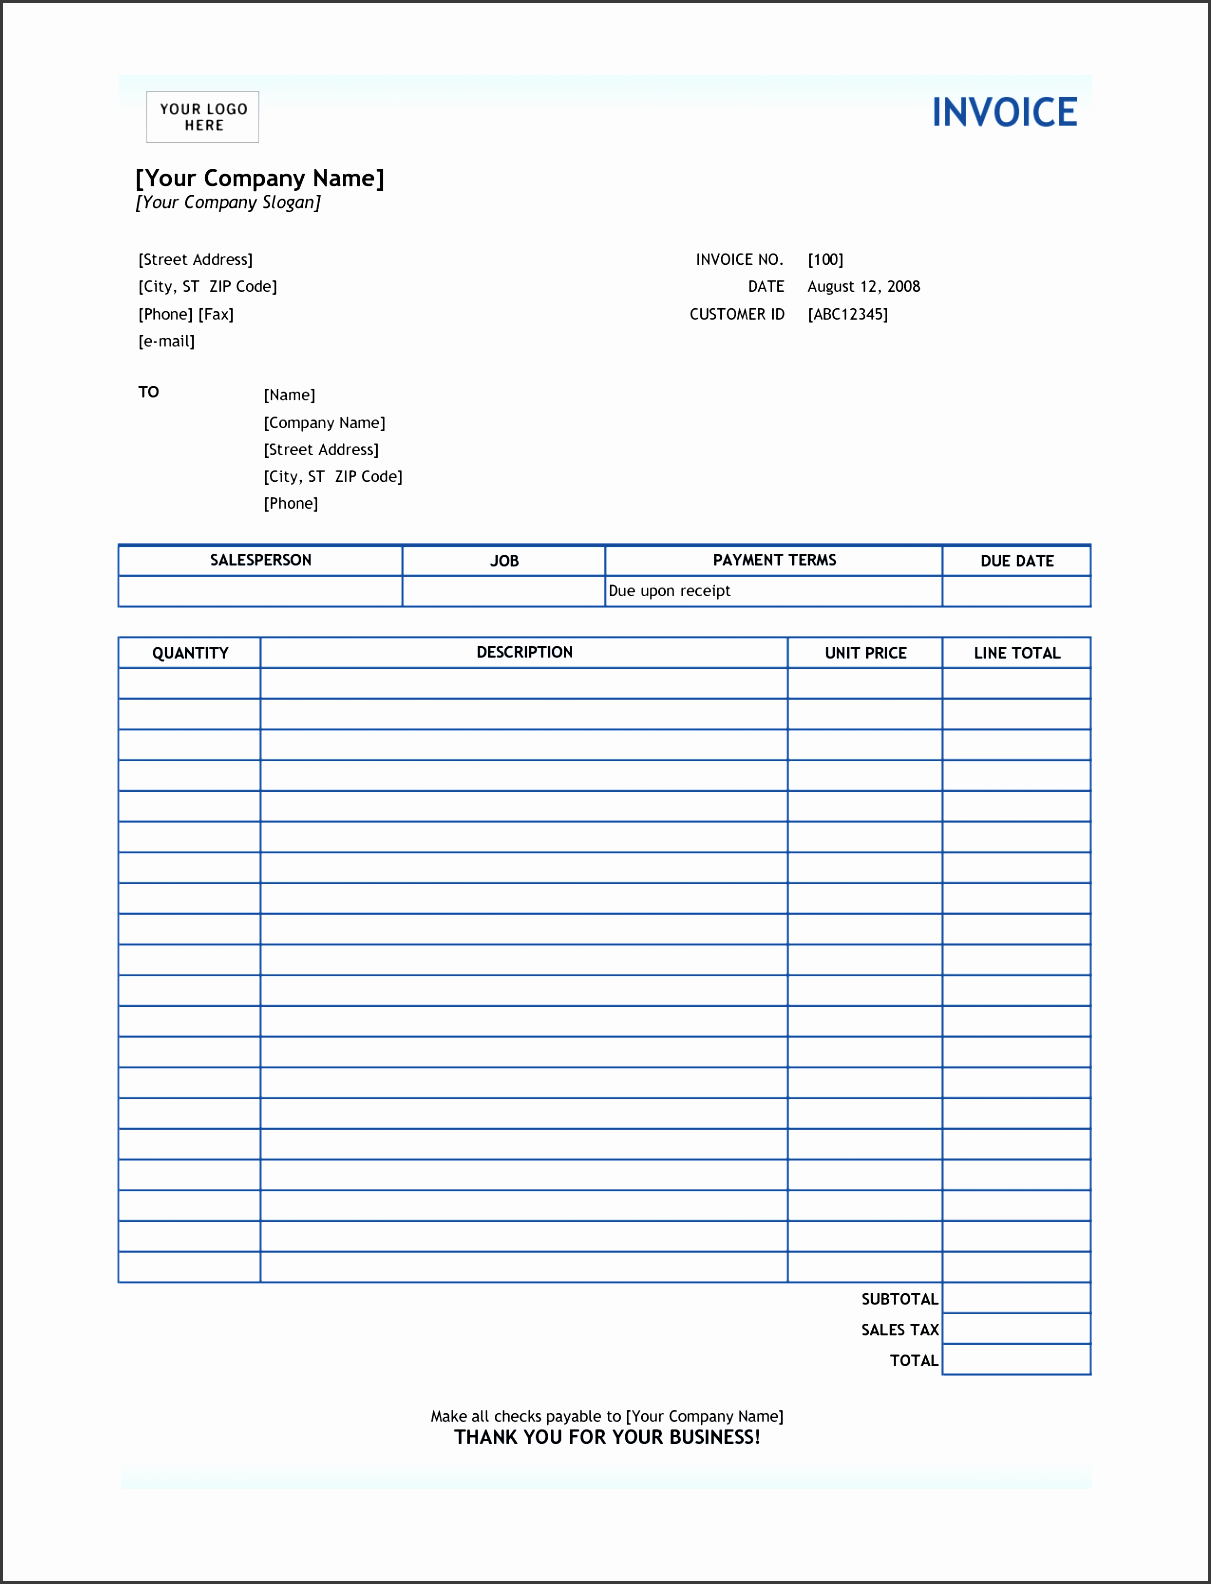 invoice for service resume templates